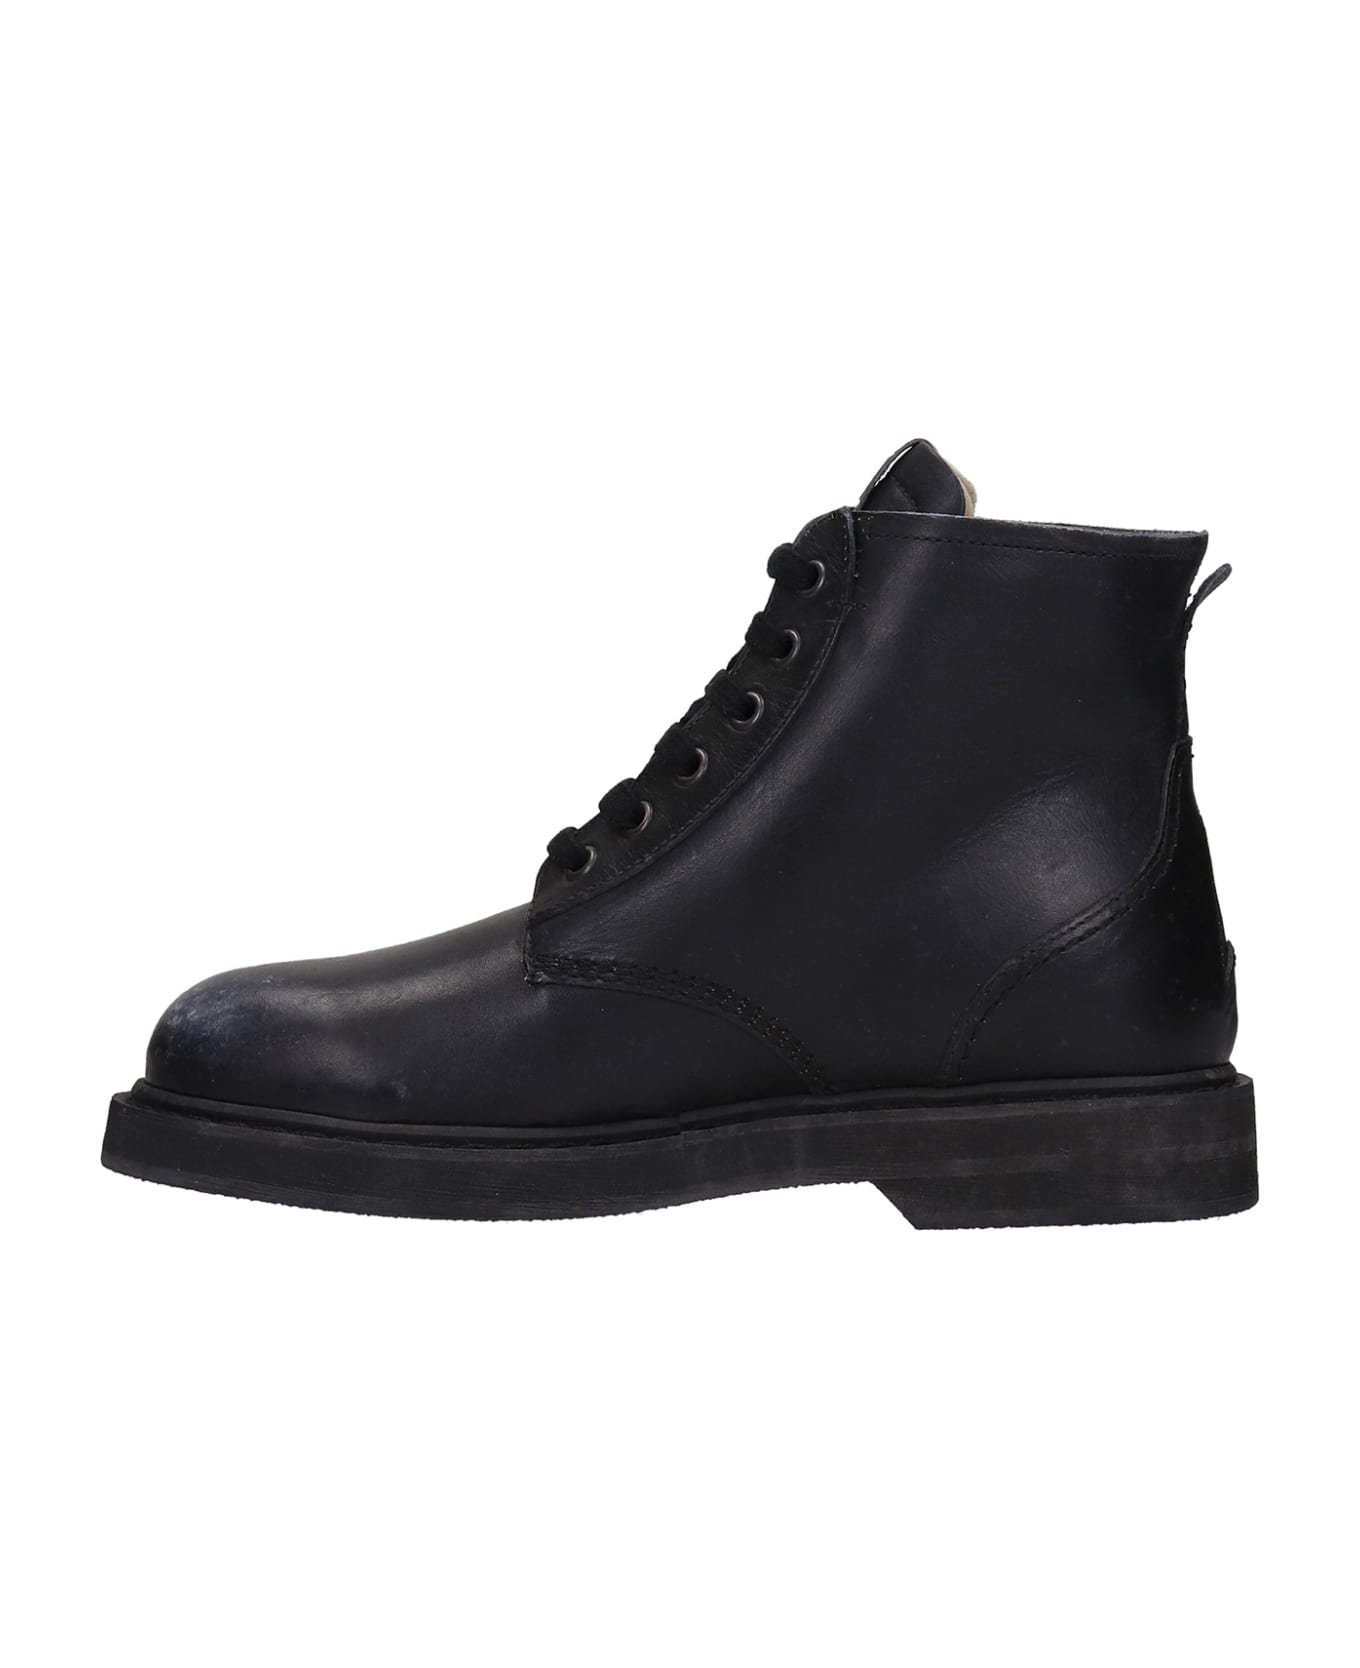 Ele Combat Boots In Black Leather